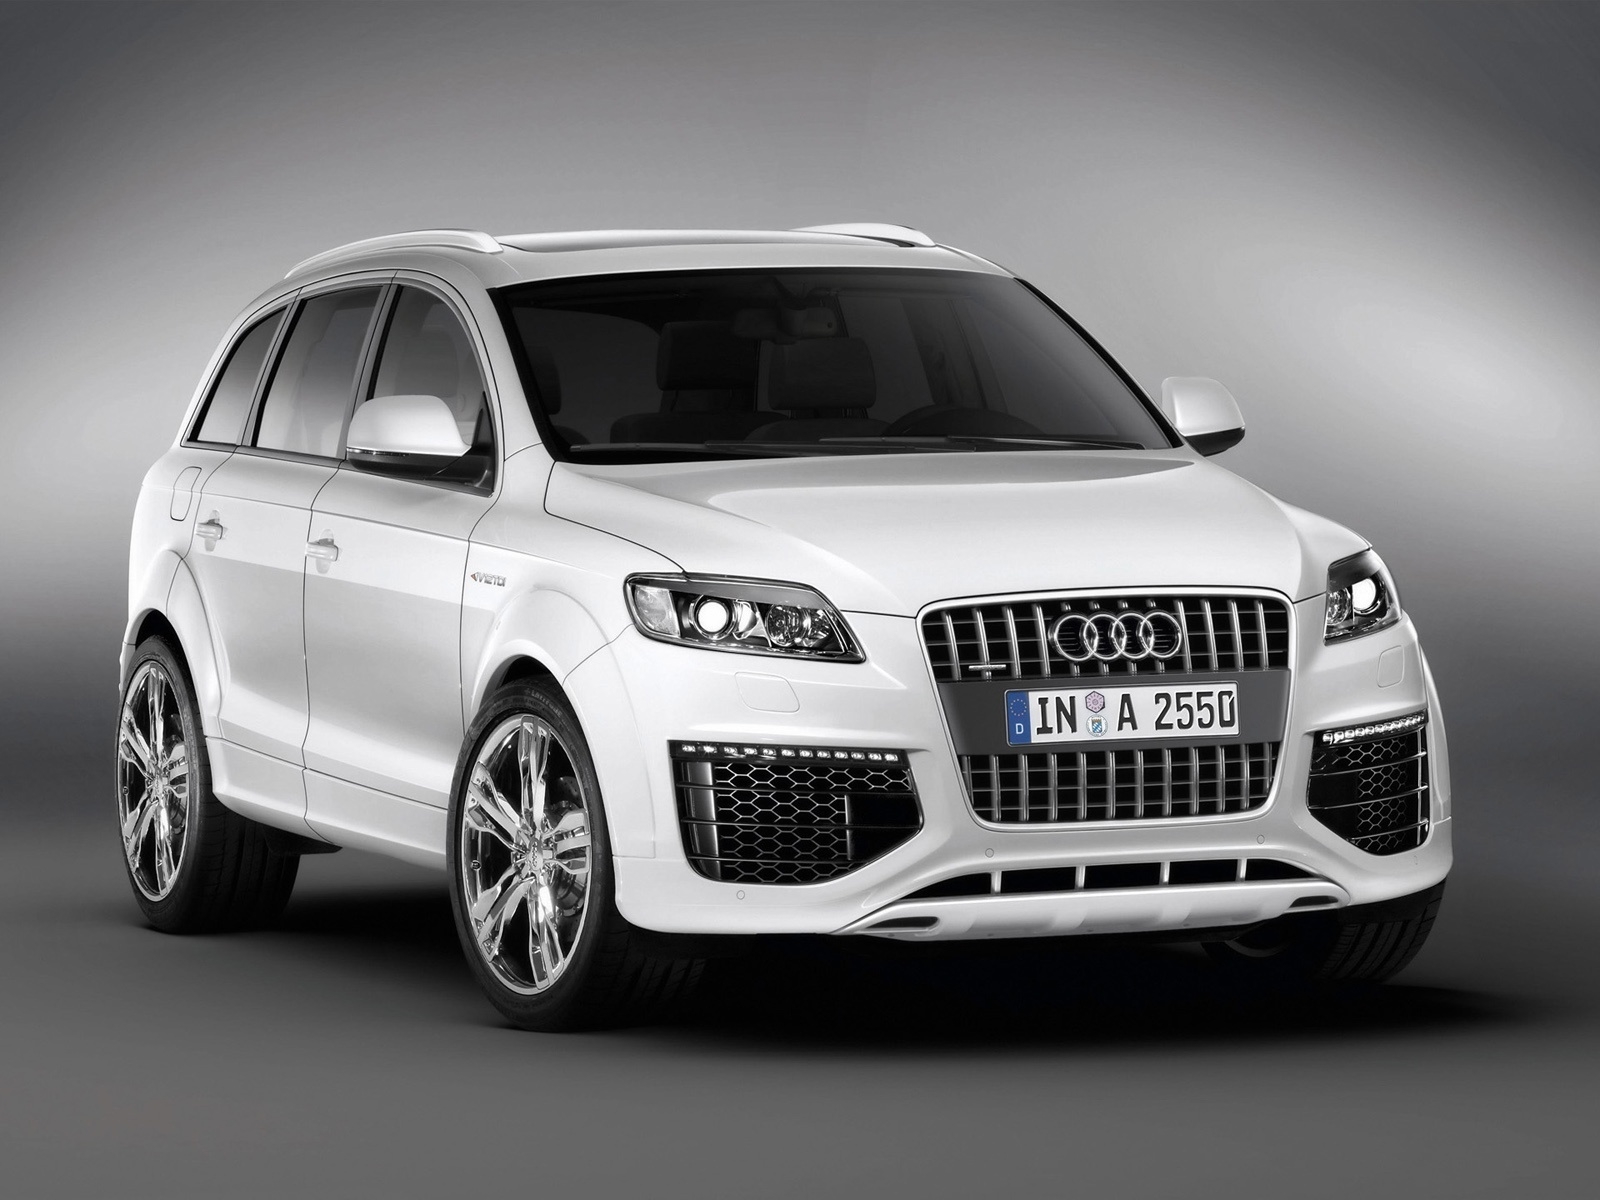 Audi Q7 Coastline front and side for 1600 x 1200 resolution